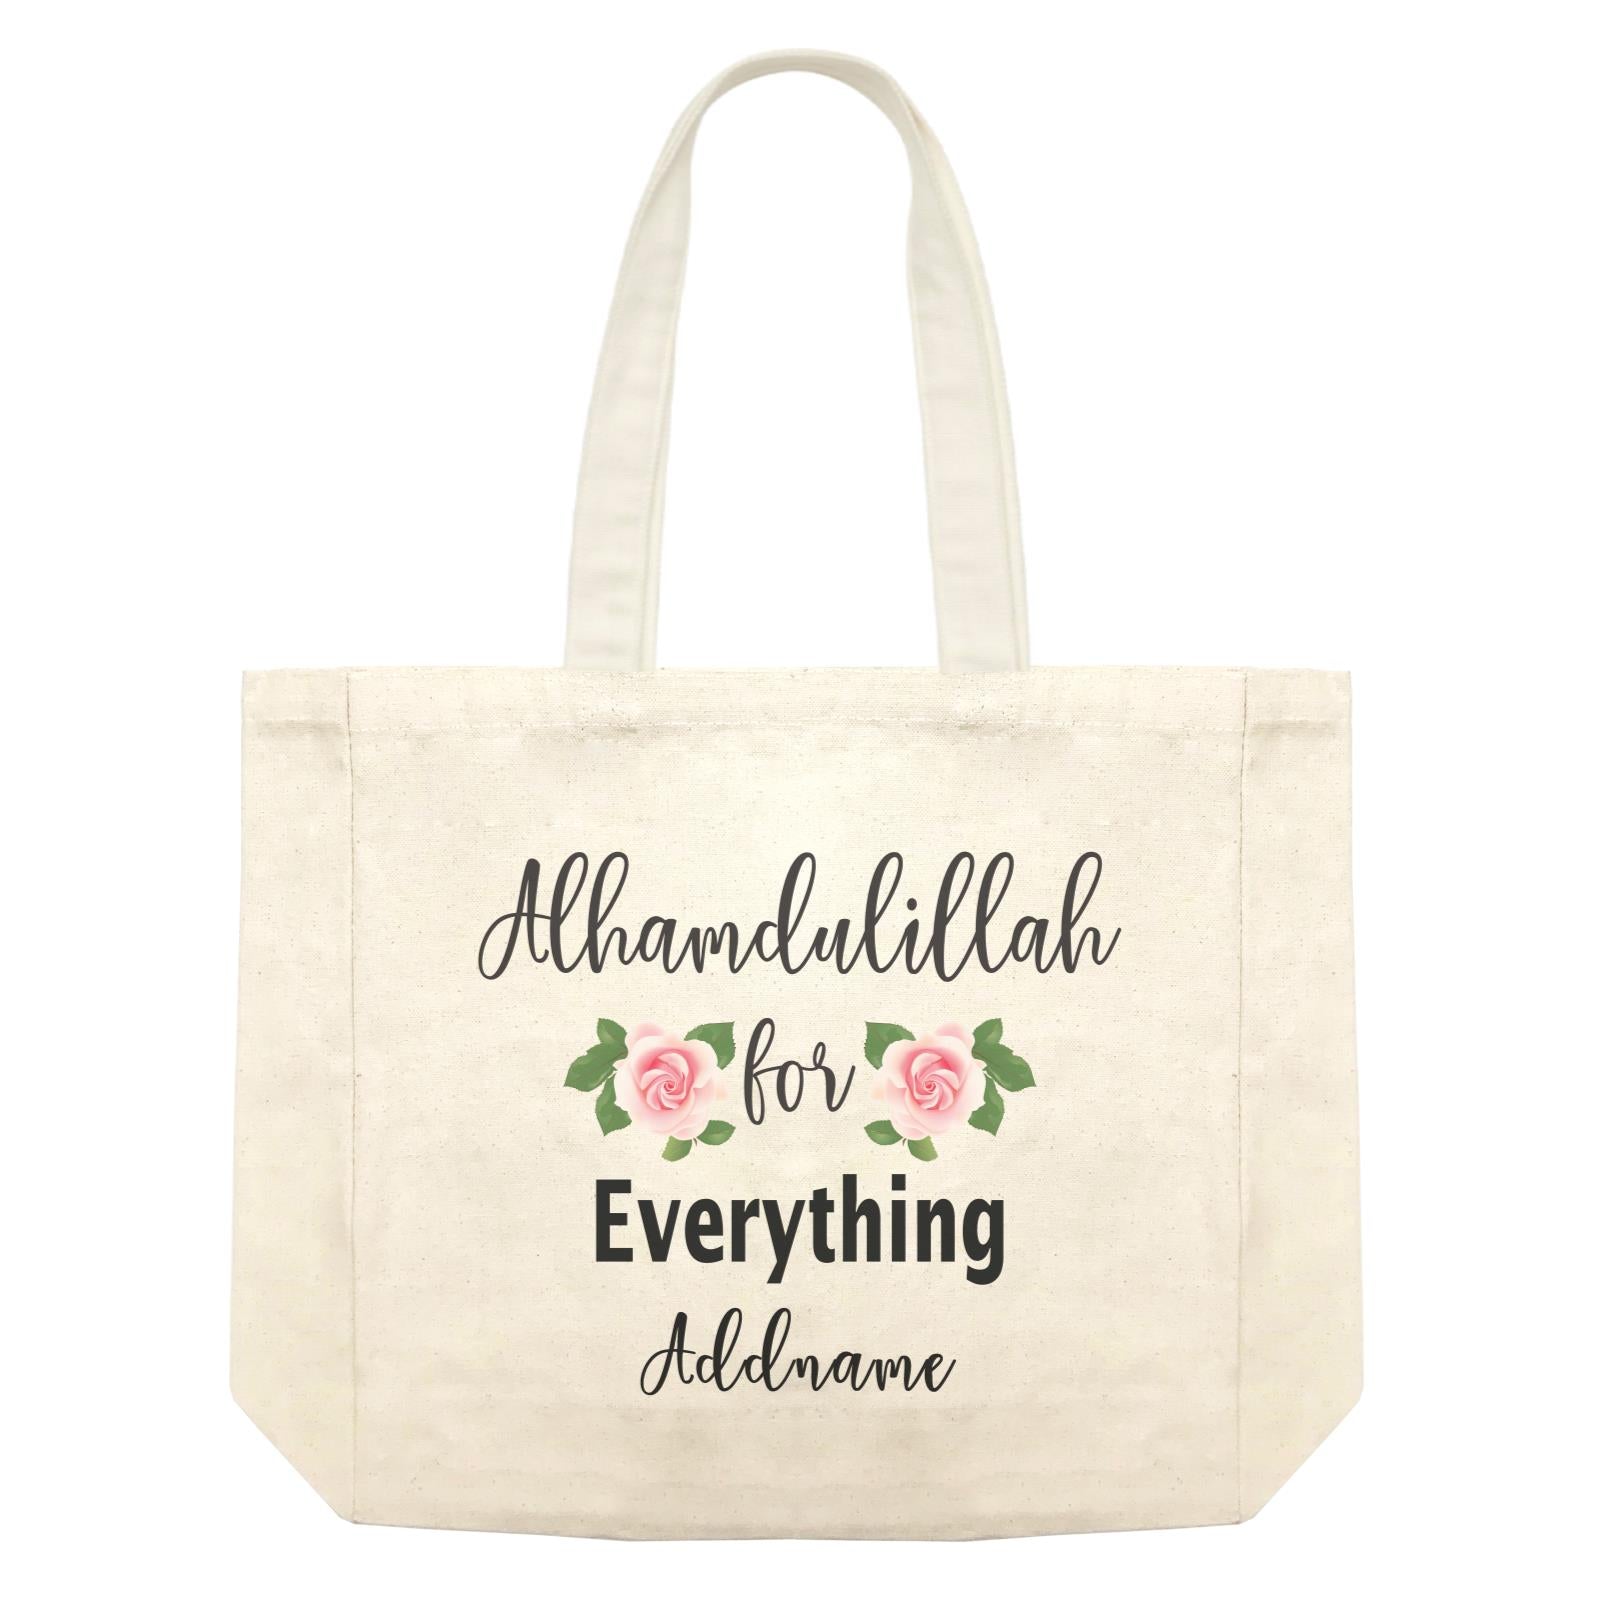 Inspiration Quotes Alhamdulillah For Everything Addname Shopping Bag